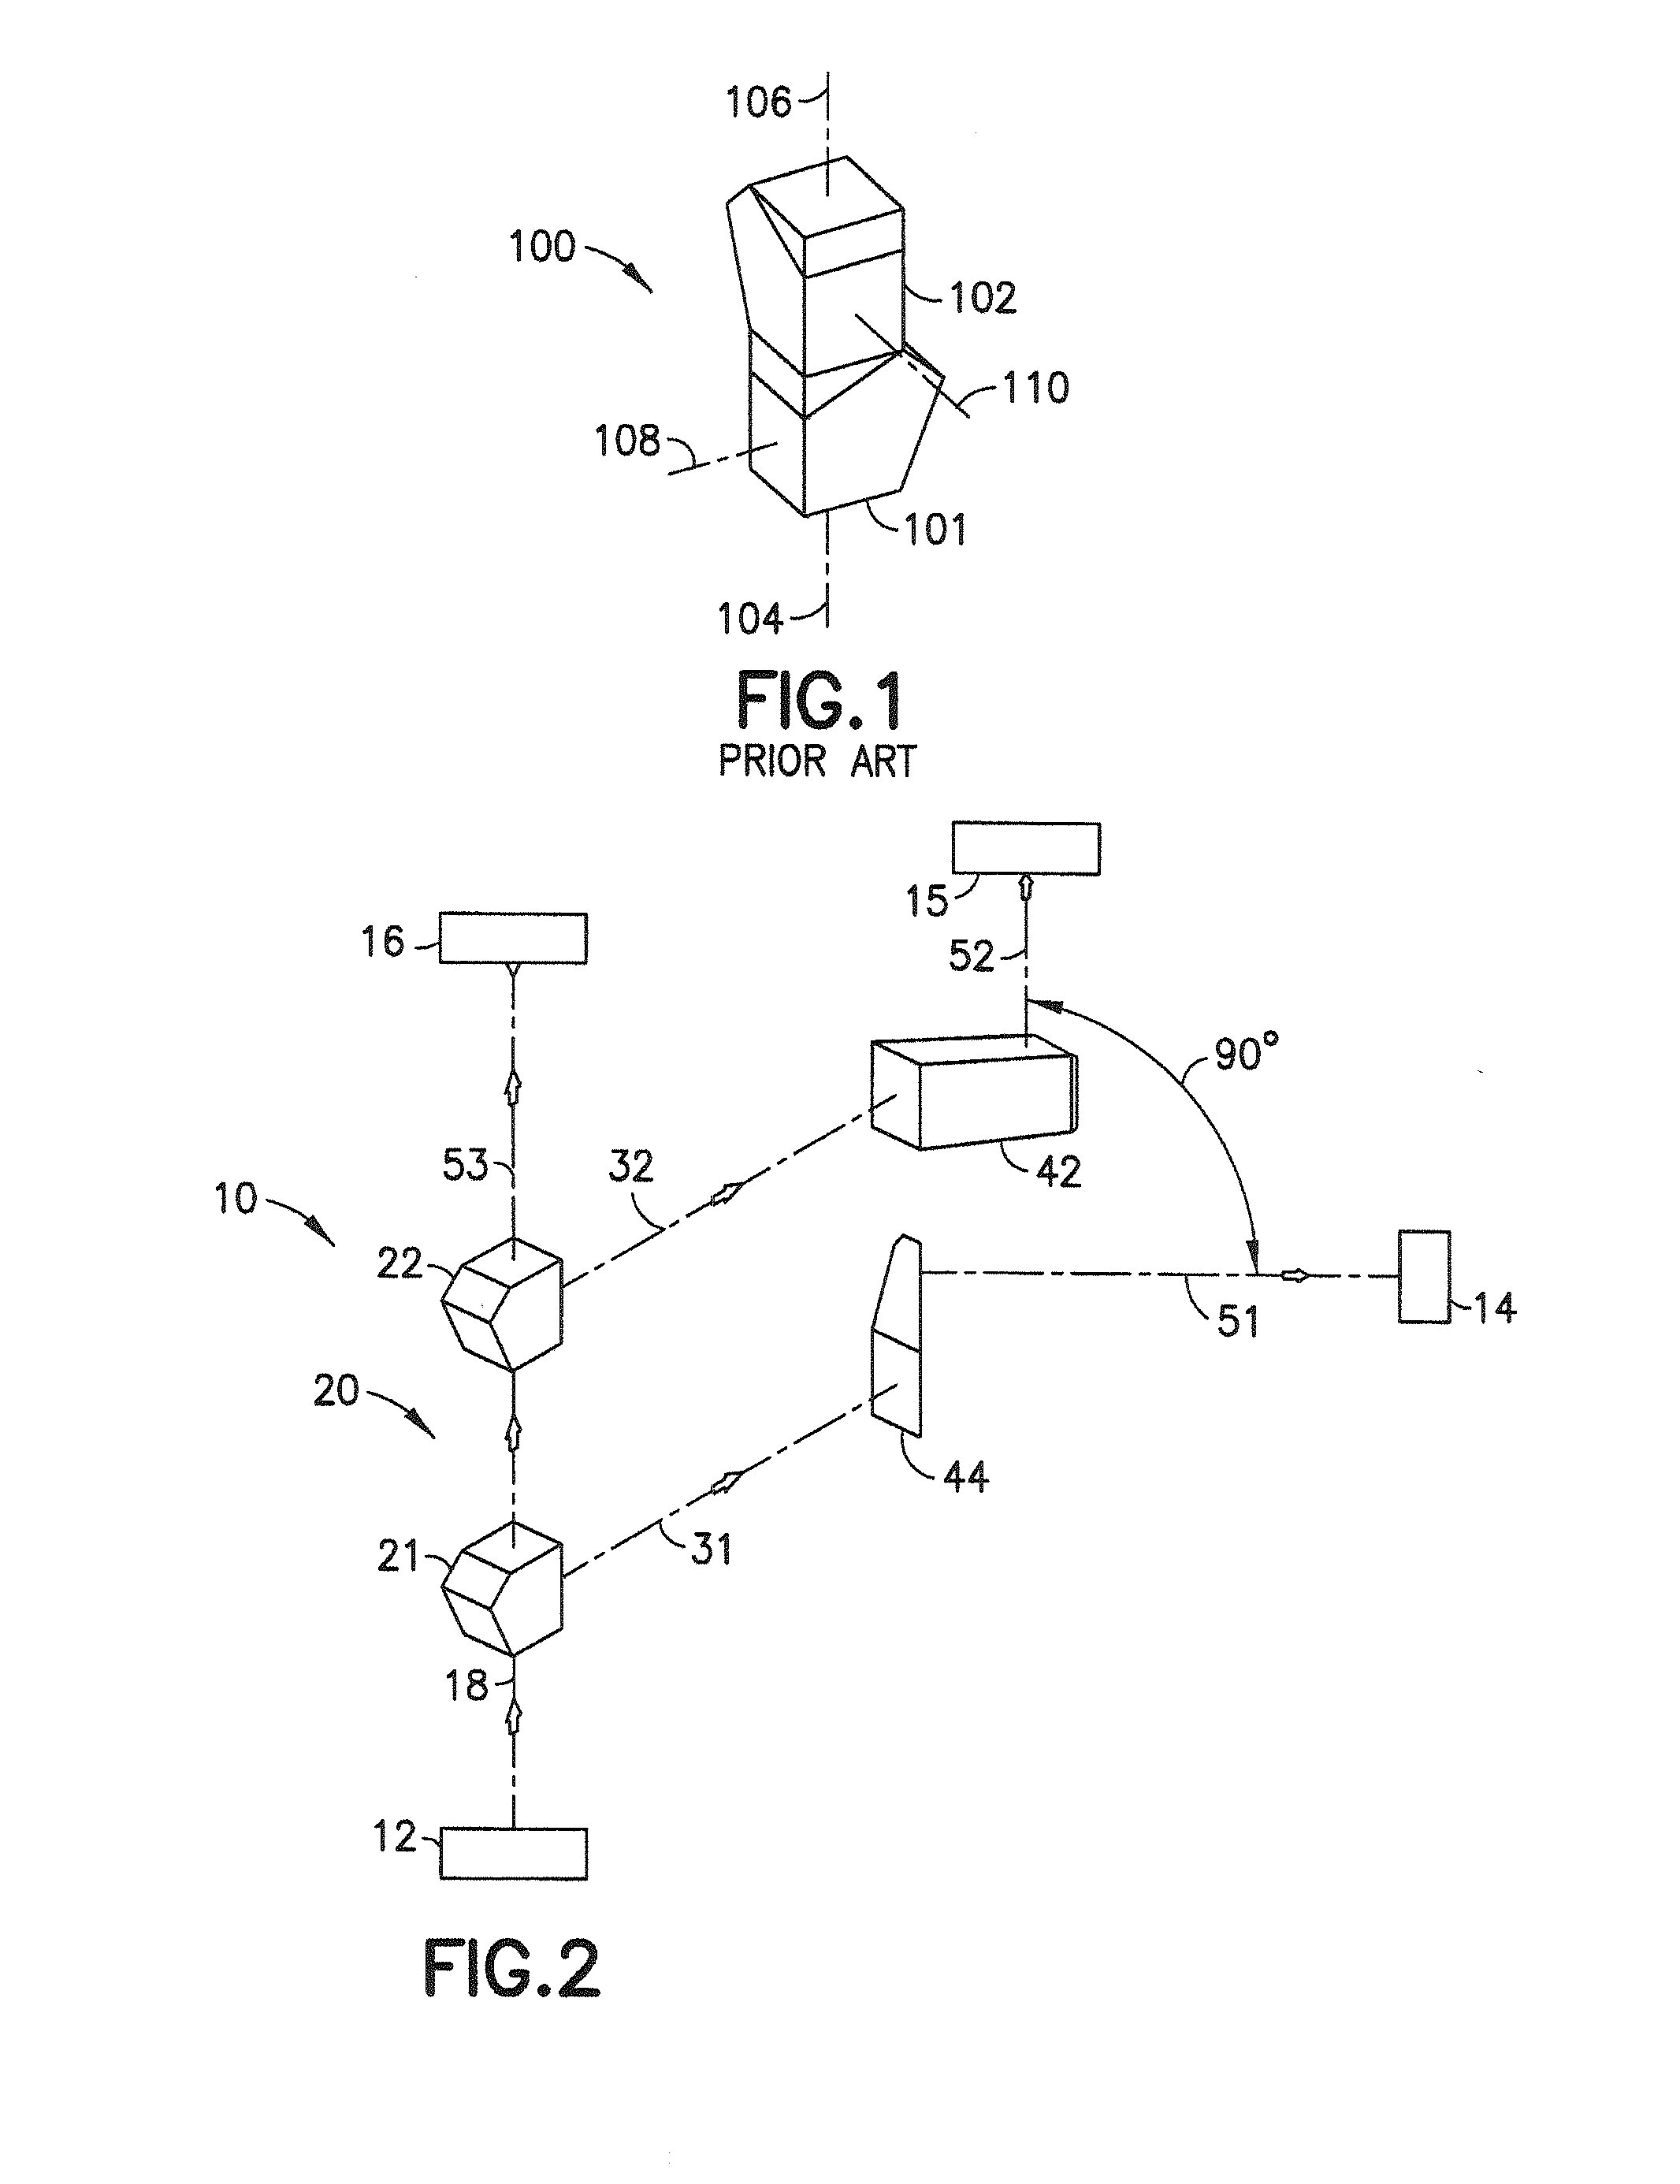 Optical assembly and laser alignment apparatus